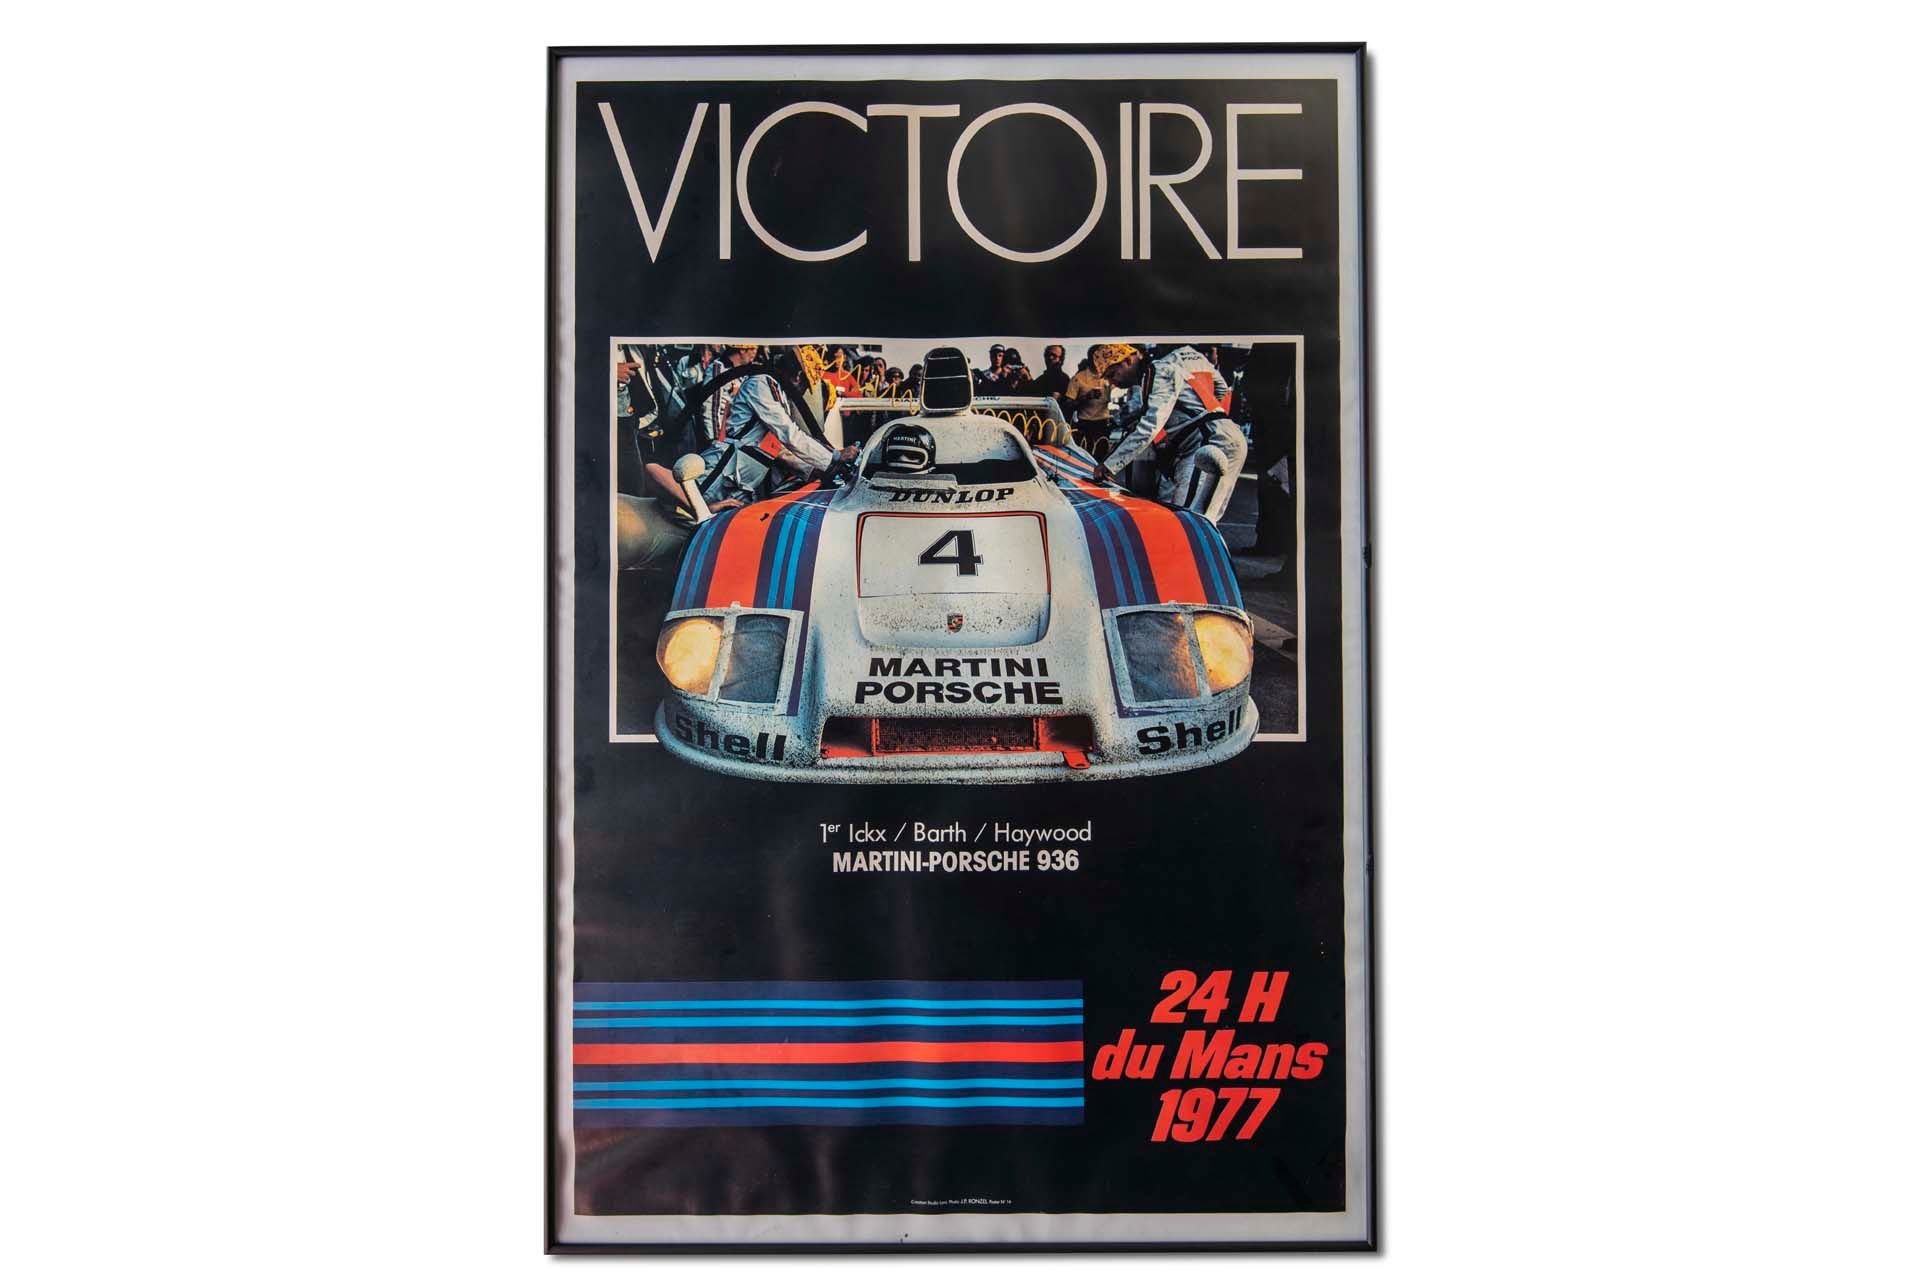 For Sale Set of 3 'Martini' Racing Cardboard Posters